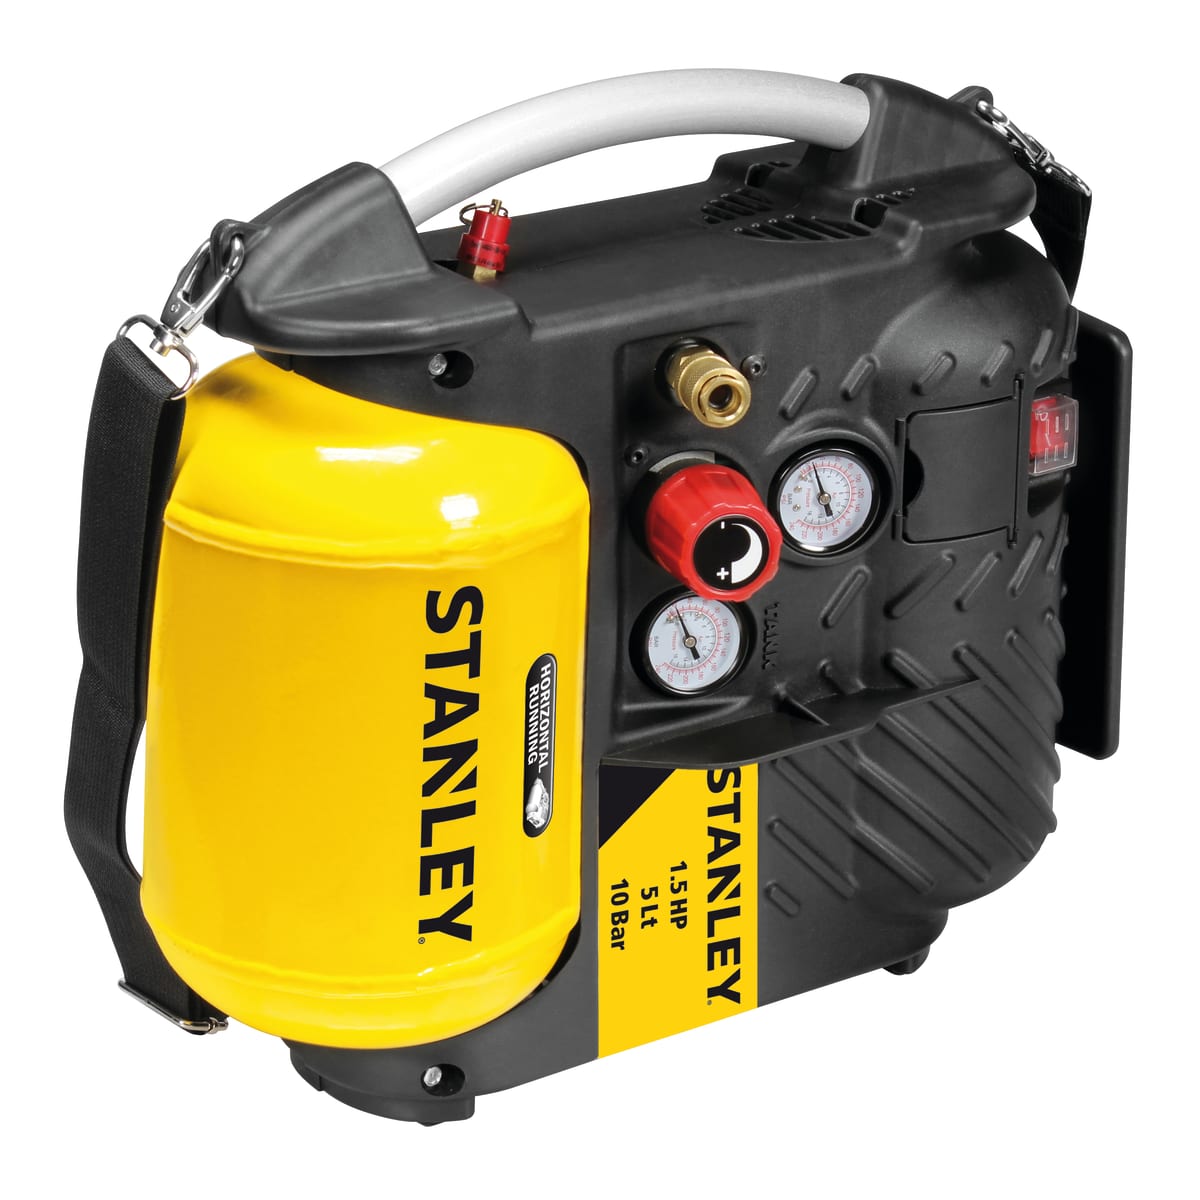 STANLEY PORTABLE AIRBOSS COMPRESSOR 1.5HP SELF-LUBRICATED 10 BAR180 L/M